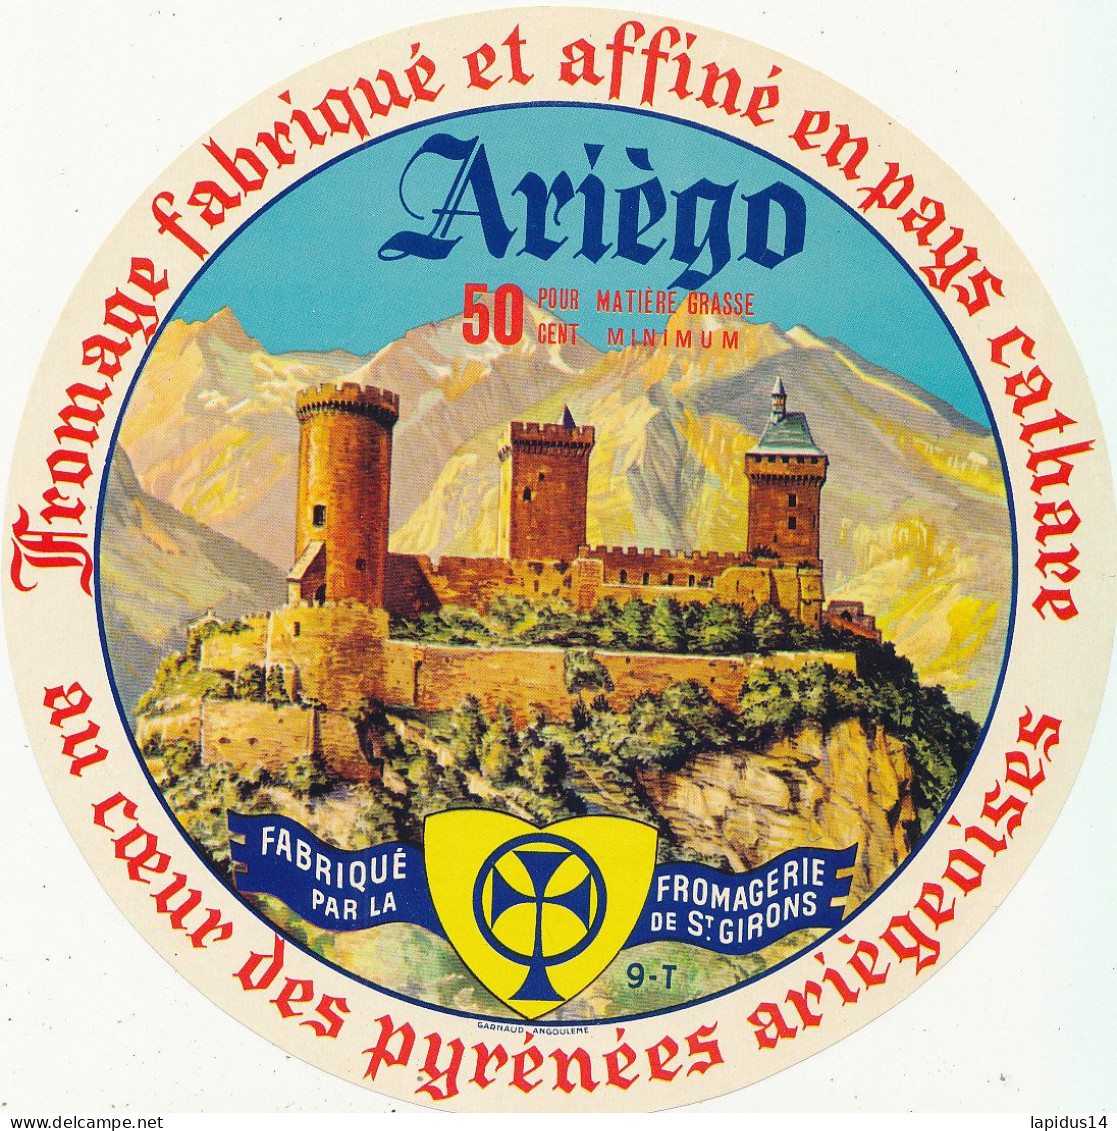 G F 1589 /  ETIQUETTE DE FROMAGE  ARIEGO   FROMAGERIE DE ST GIRONS  ARIEGE - Formaggio